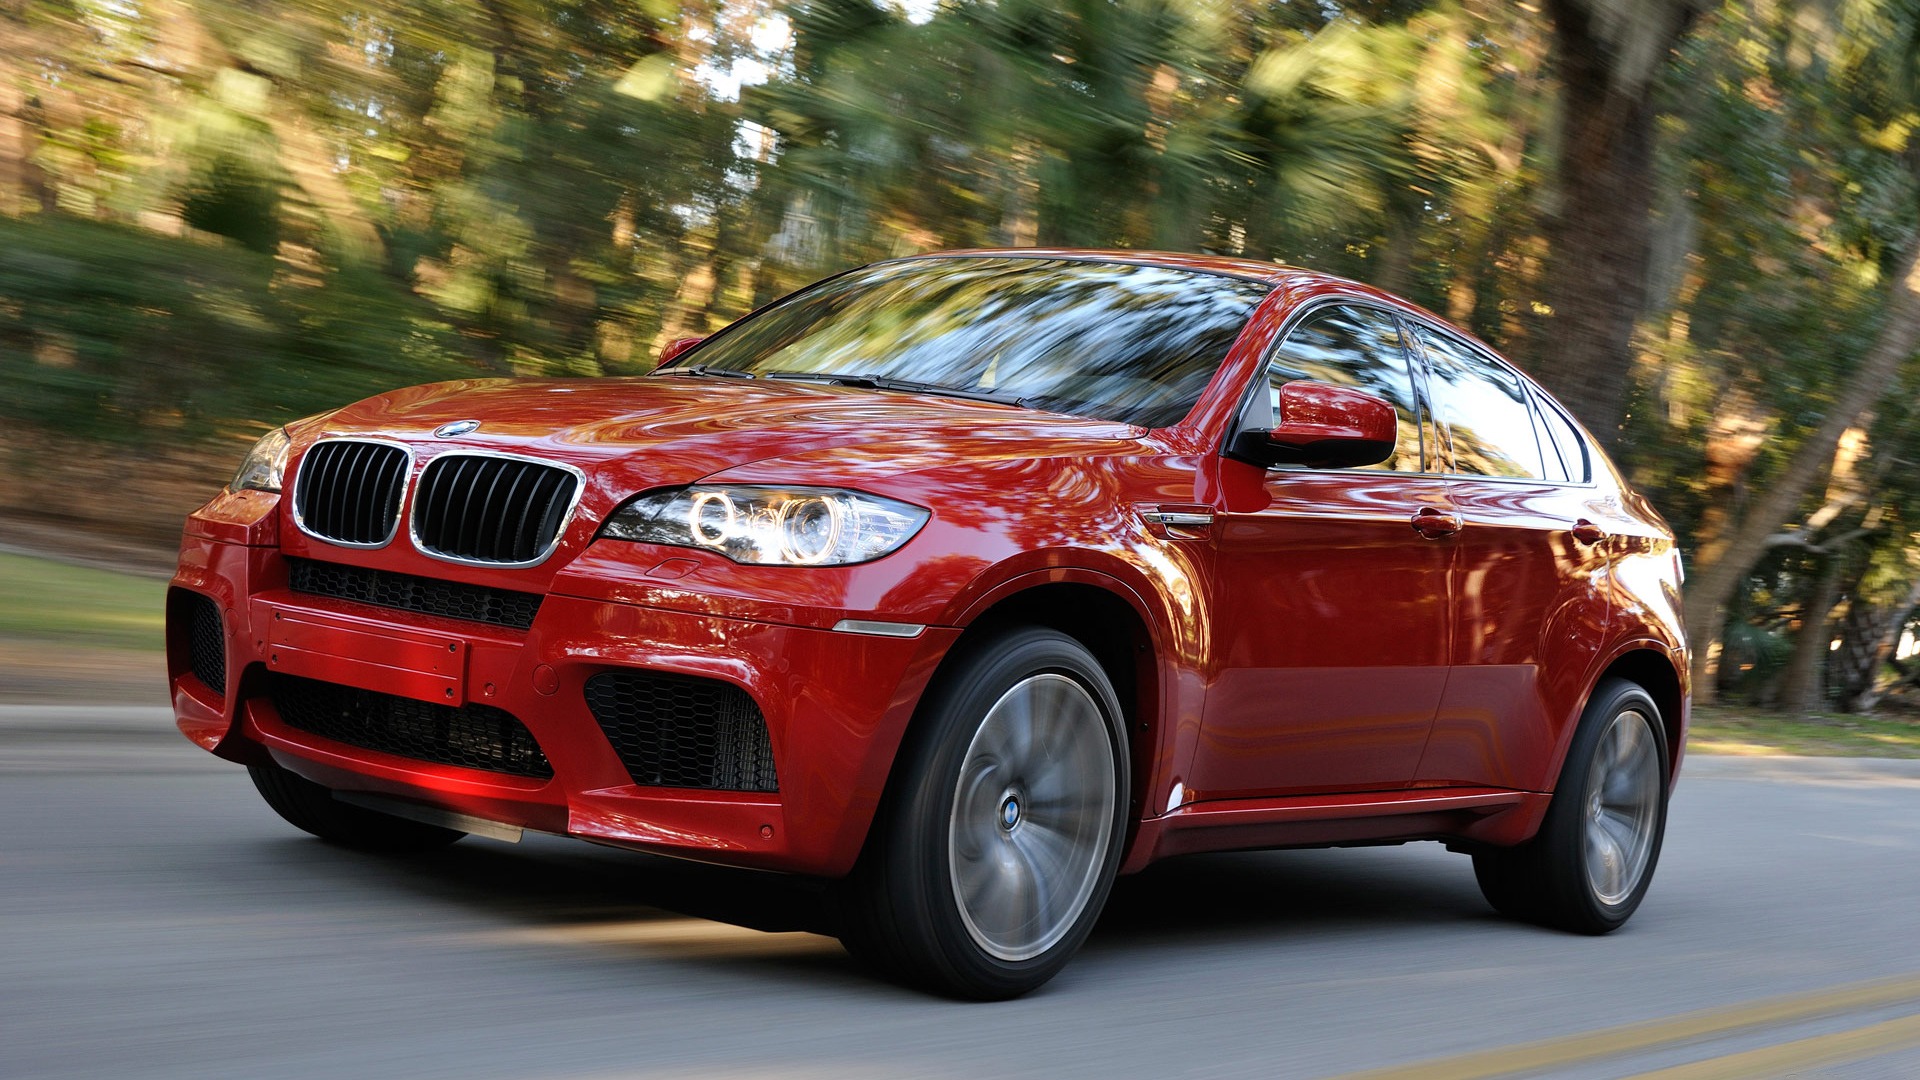 Bmw X6 M Wallpaper Cars In Jpg Format For